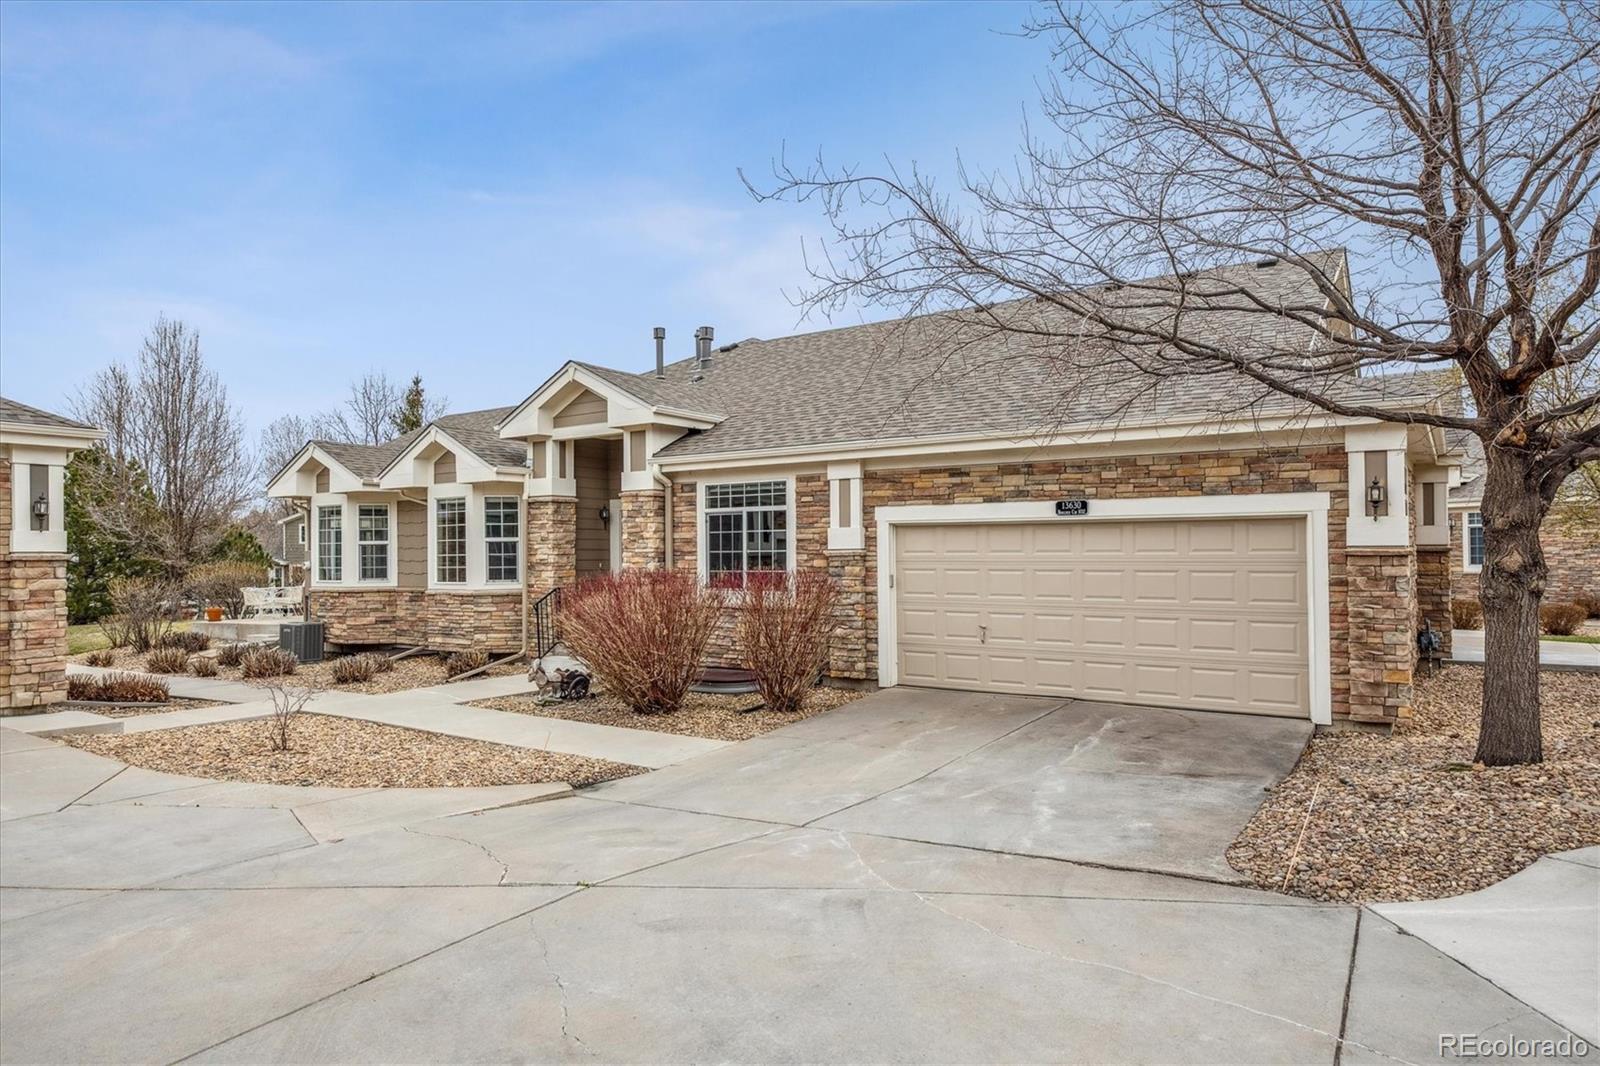 Report Image for 13630  Boulder Circle,Broomfield, Colorado